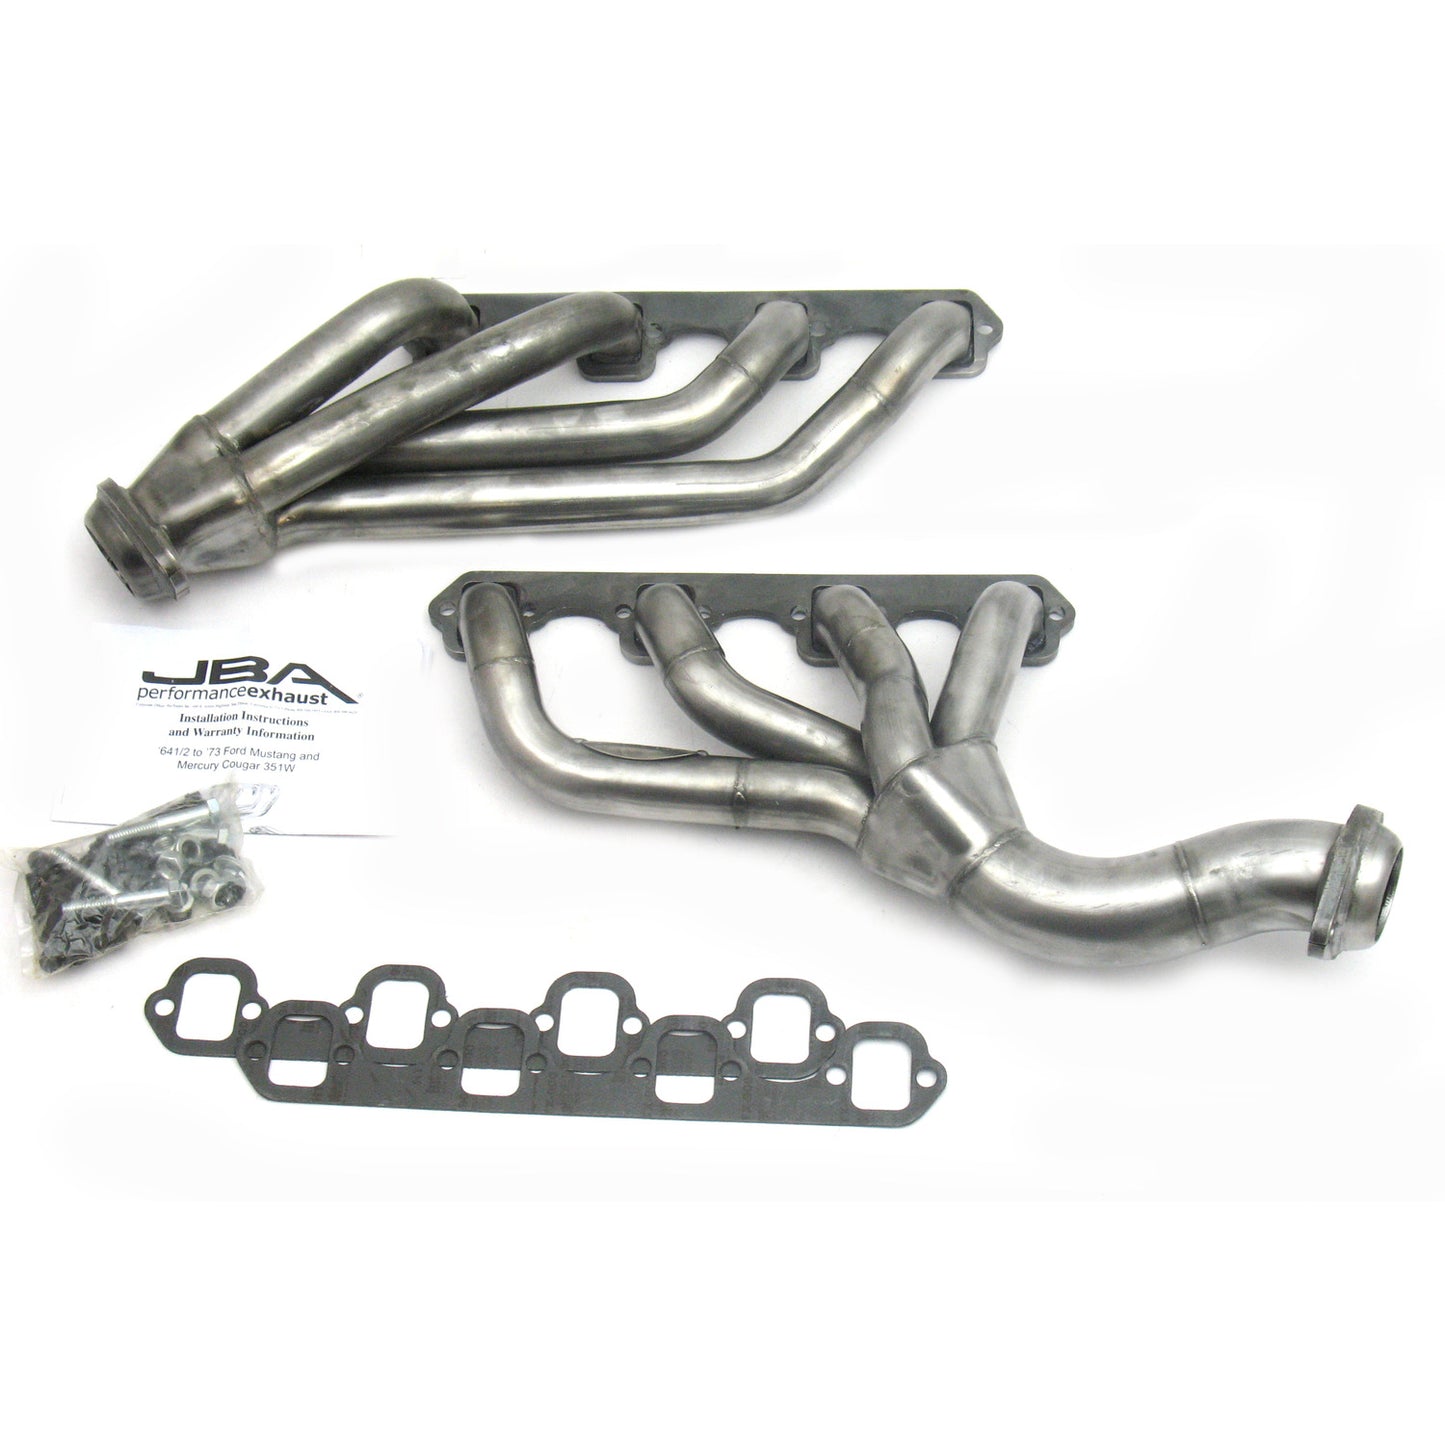 JBA Performance Exhaust 1655S 1 5/8" Header Shorty Stainless Steel 65-73 Mustang 351W Cable Clutch